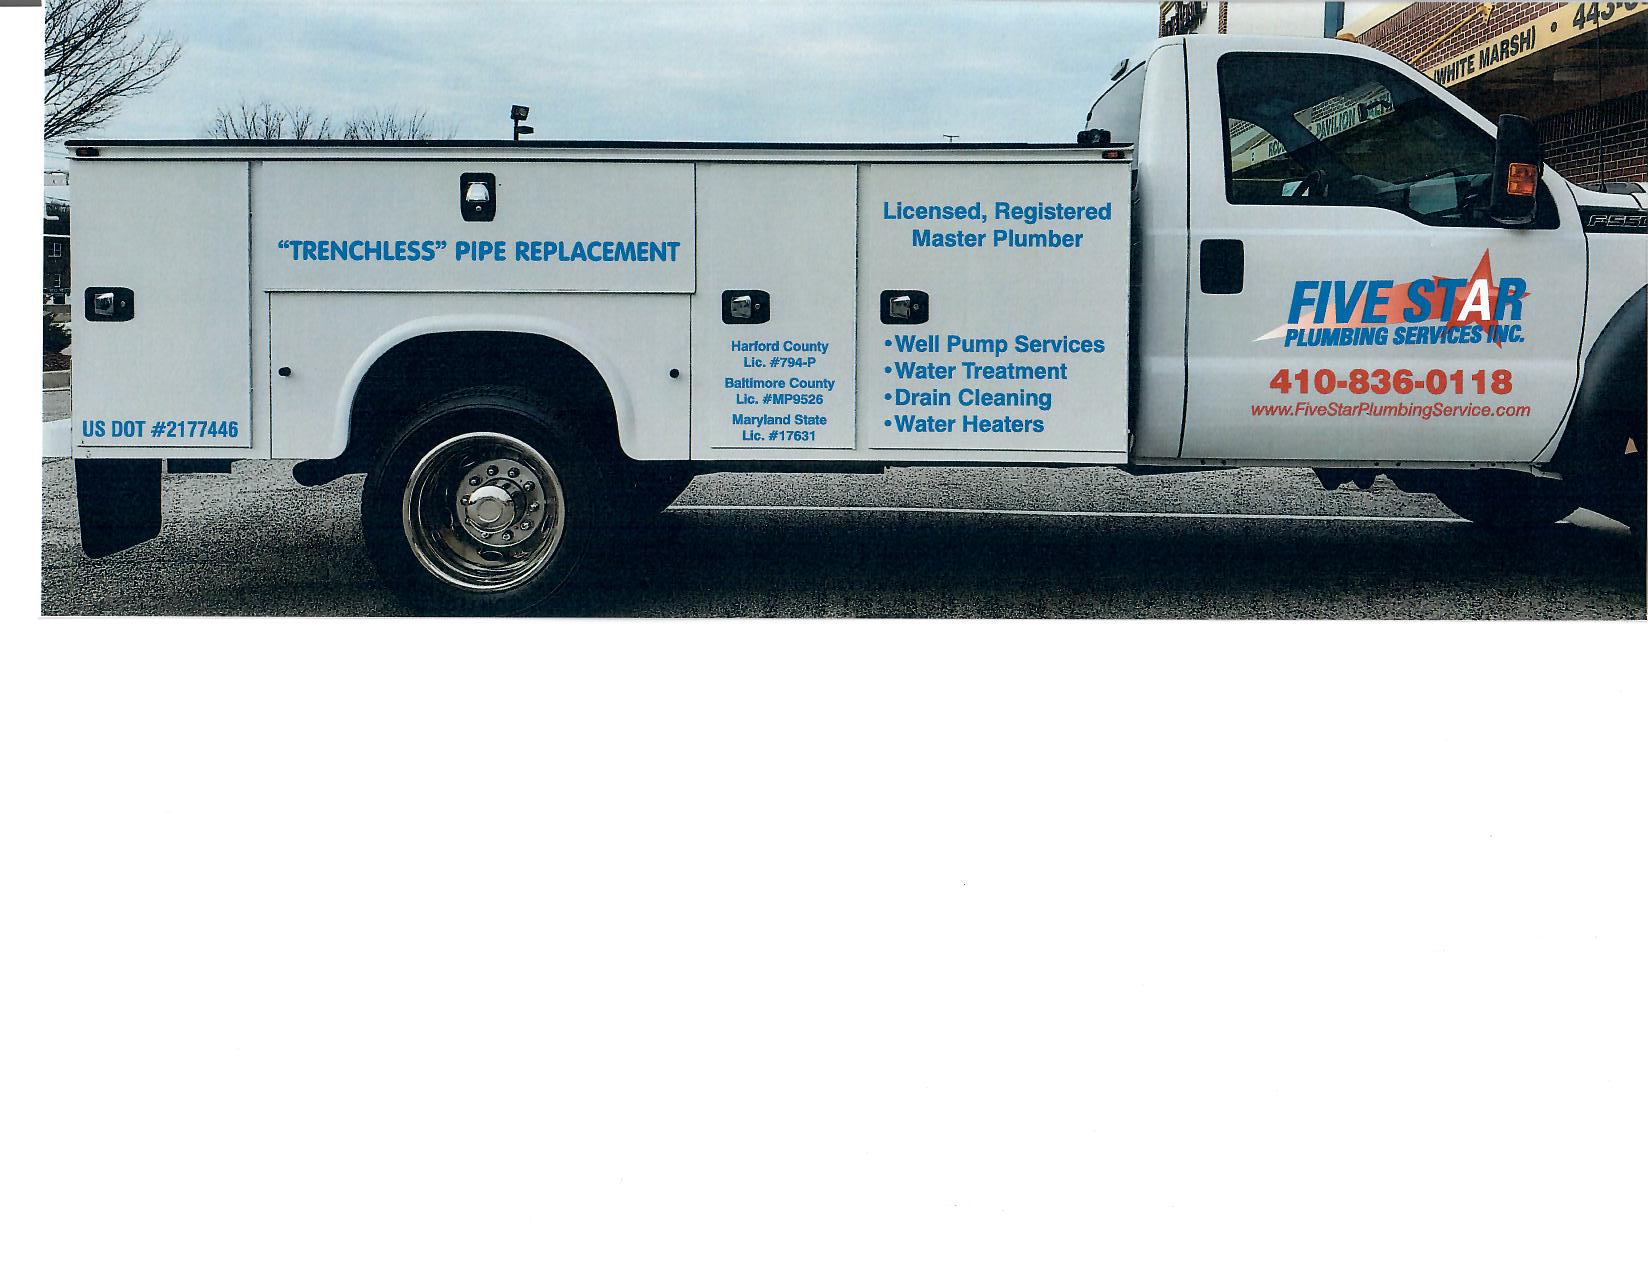 Five Star Plumbing Services Inc Photo